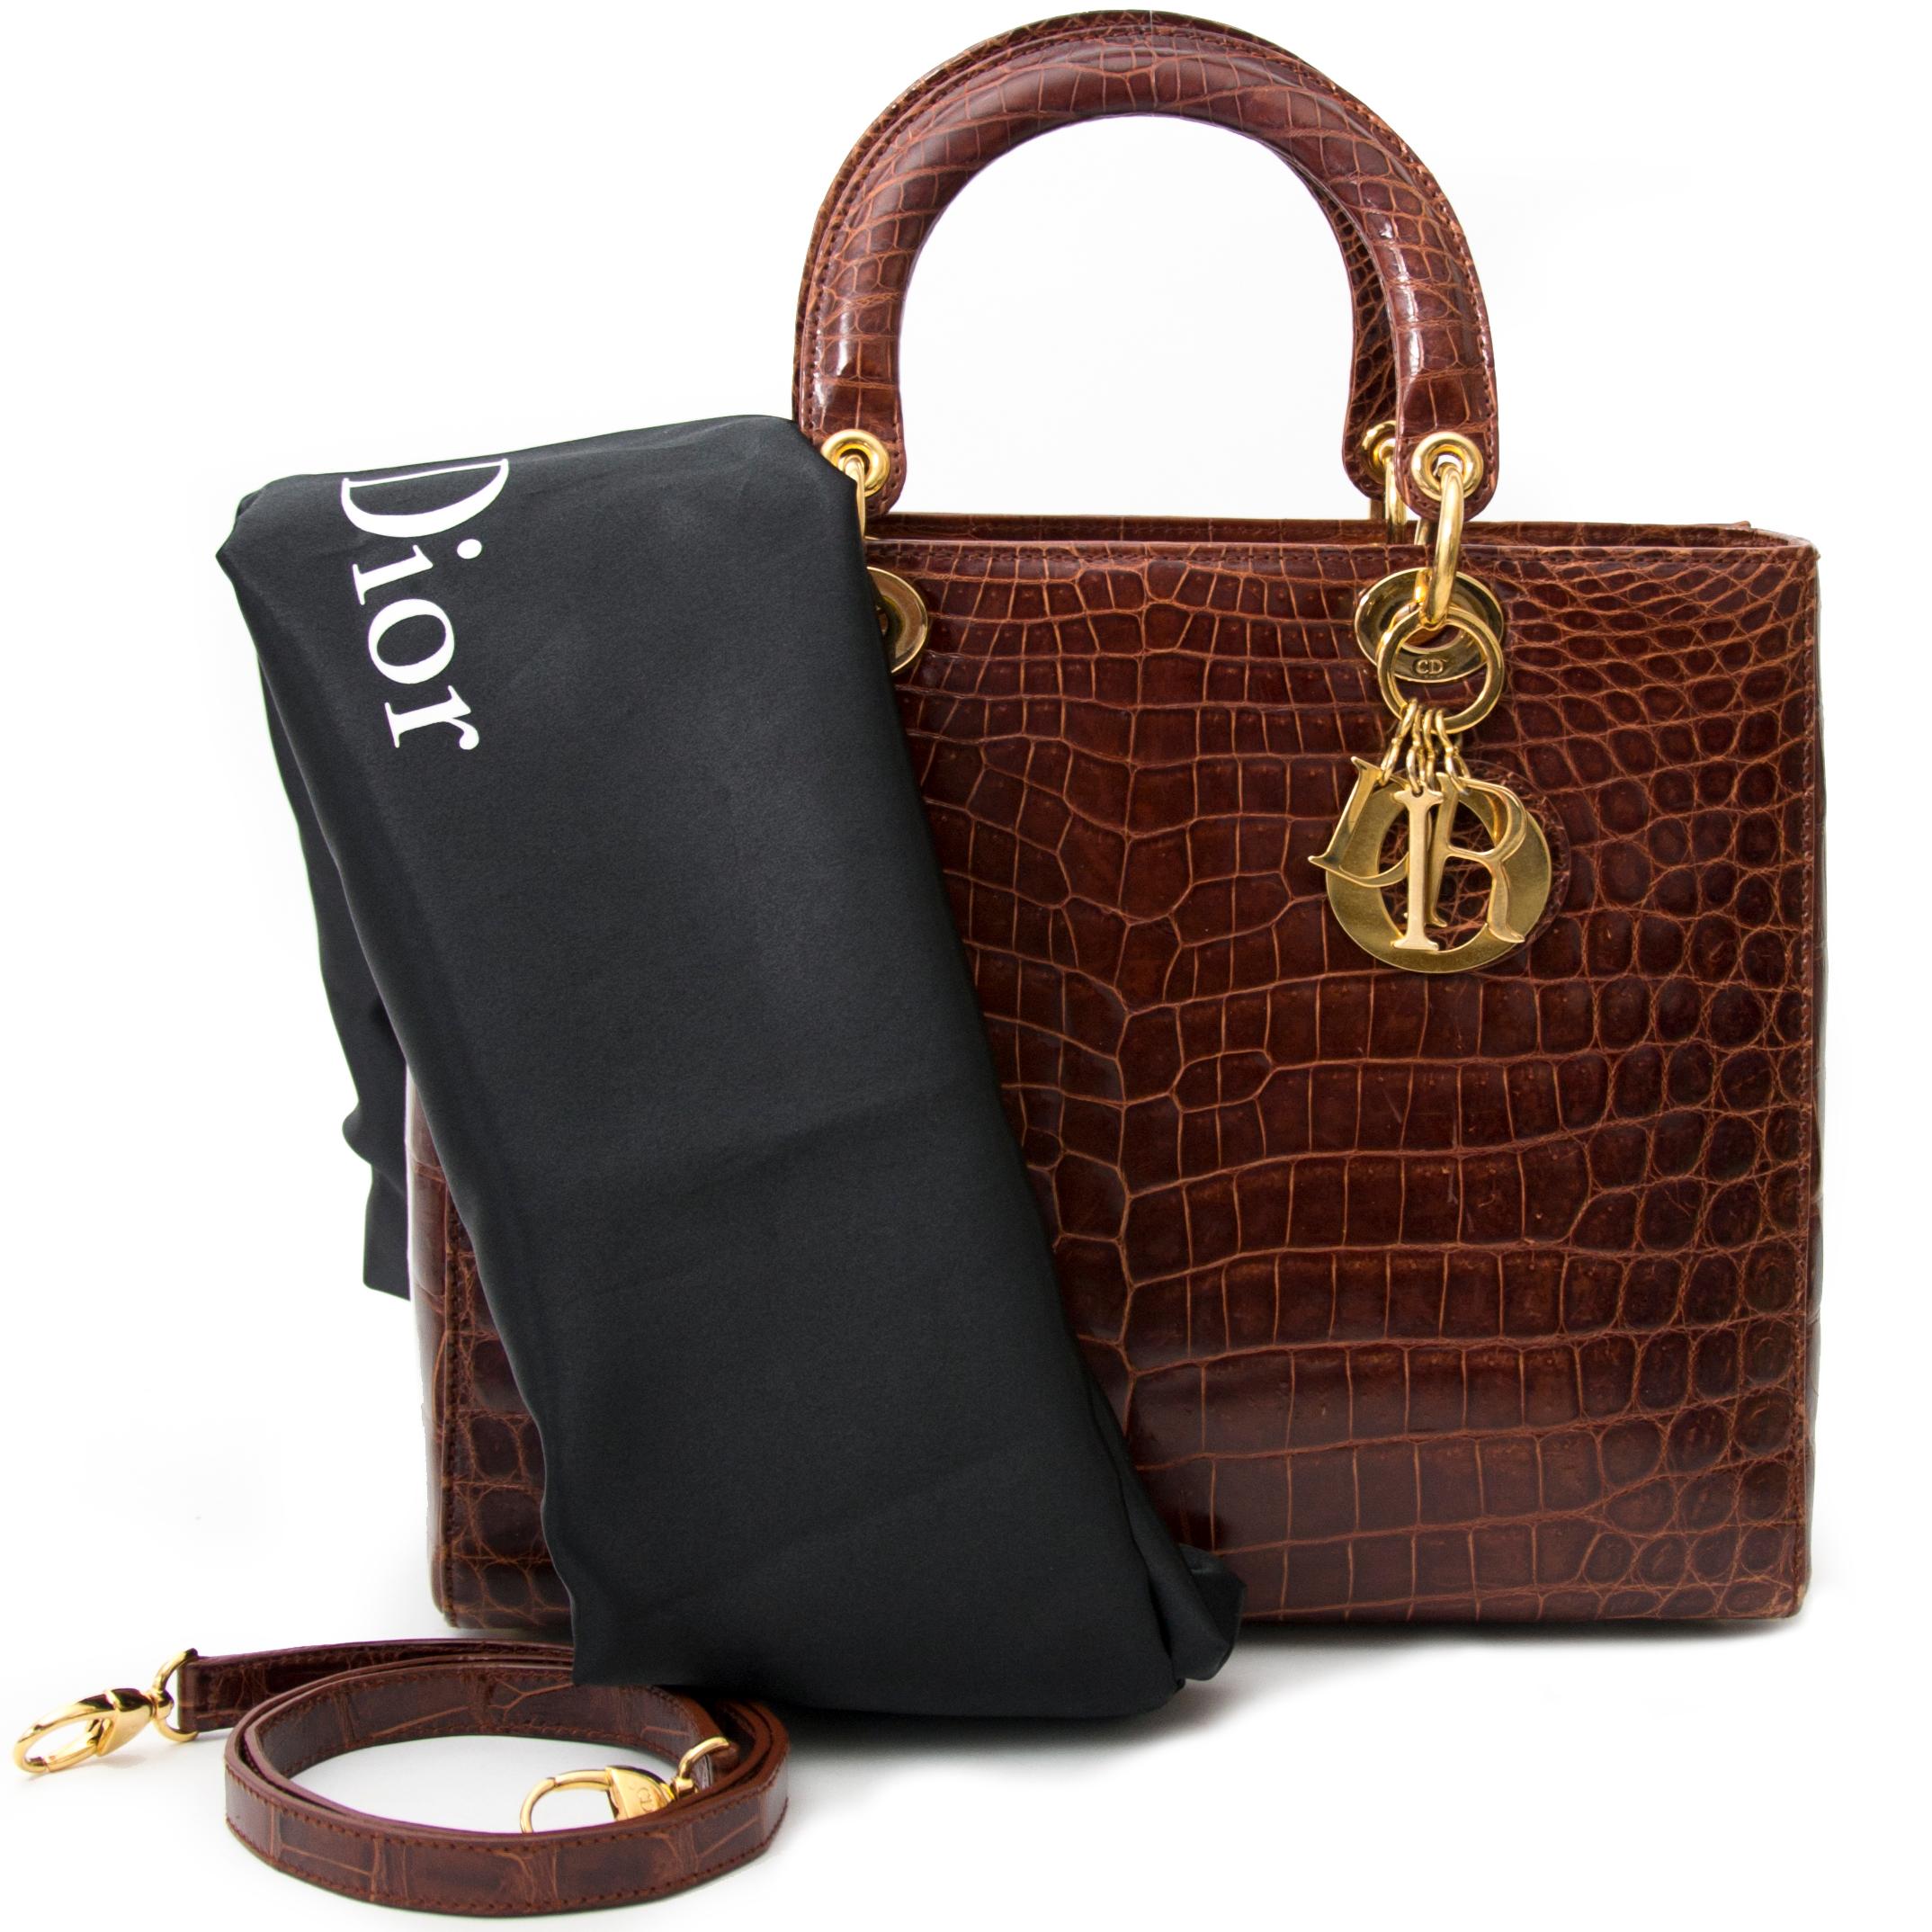 Very Good Preloved Condition

Estimated retail price €30.000,-

Dior Brown Croco Lady Dior Bag

A timeless and unique work of art, the 